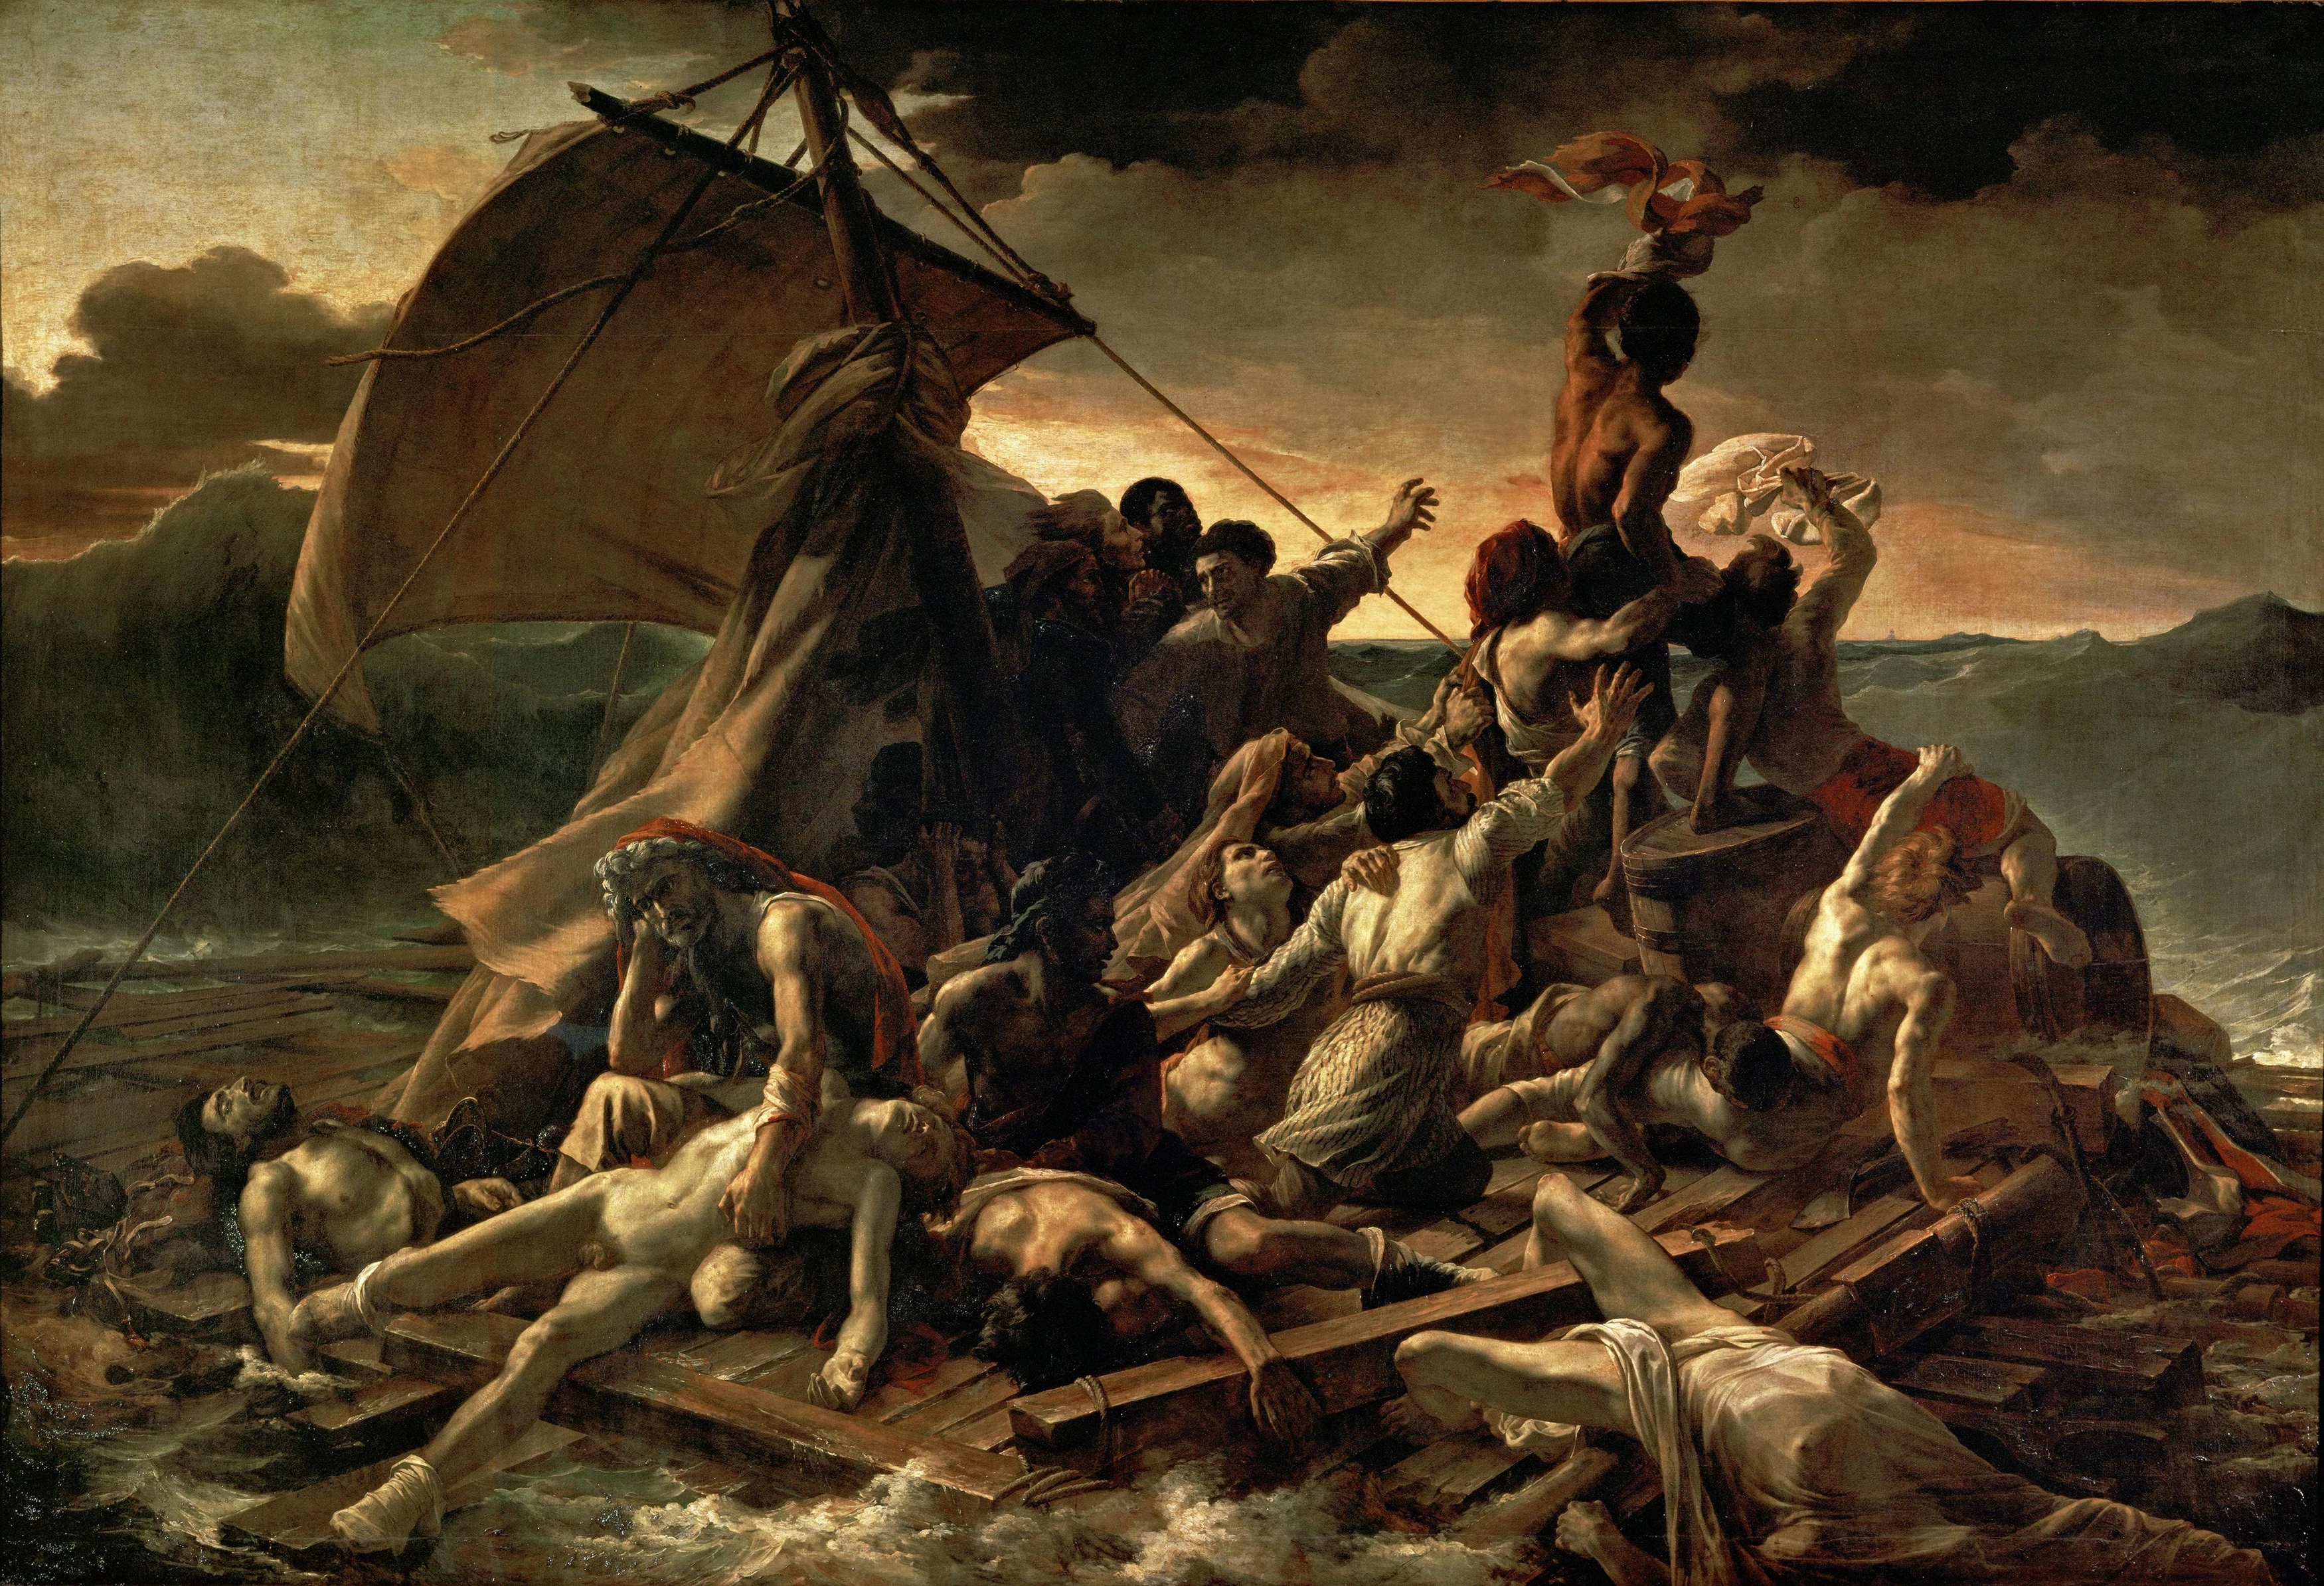 Shipwreck, Themes in Art